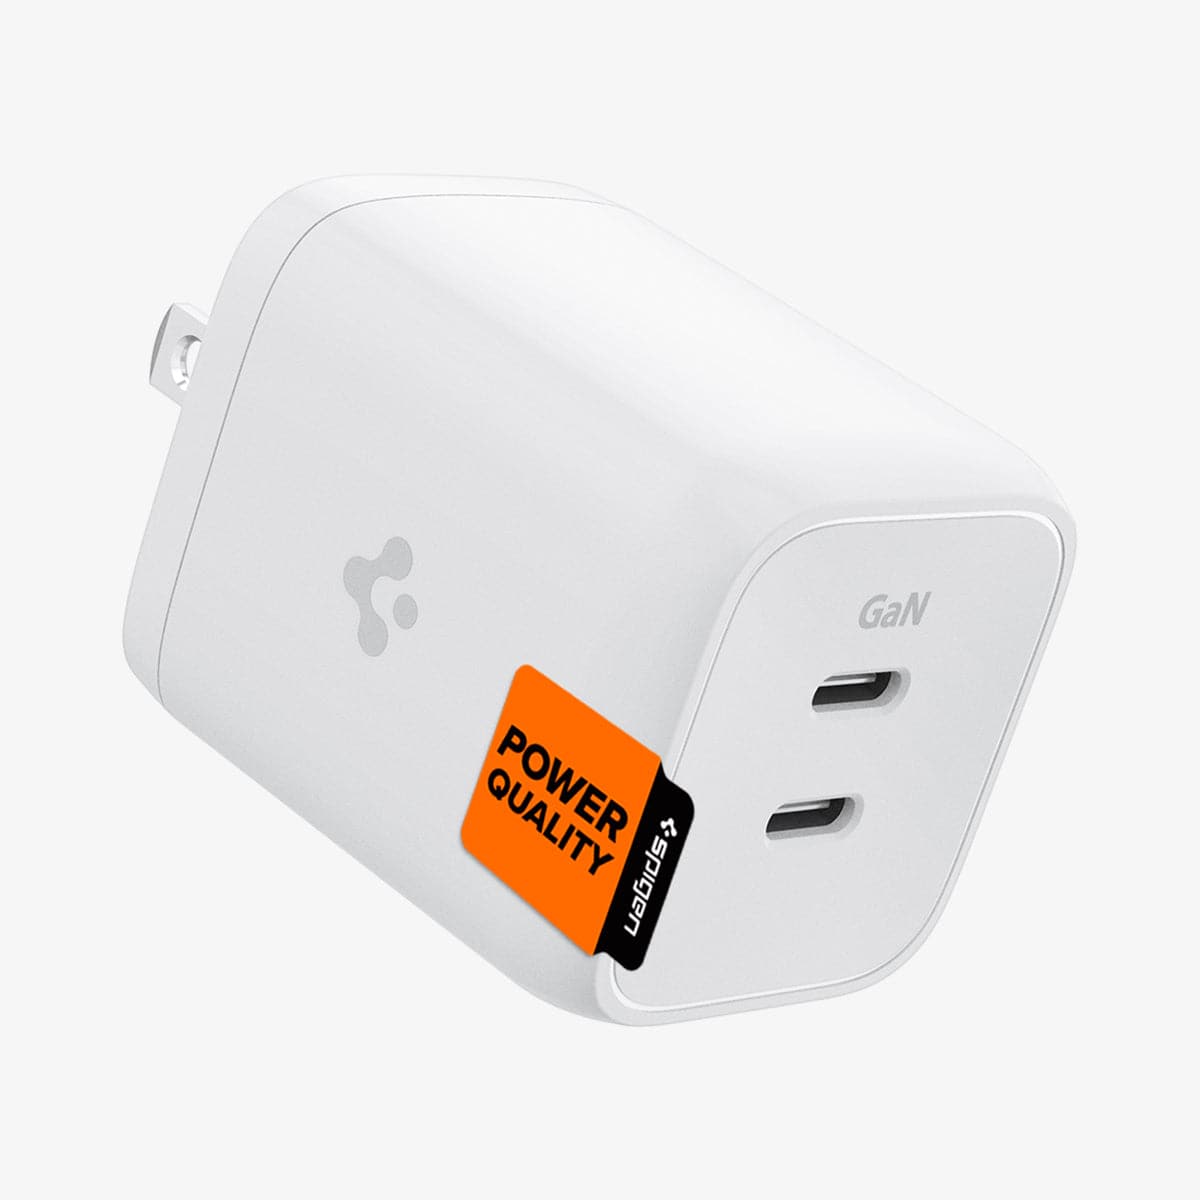 ACH03719 - ArcStation™ Pro GaN 652 Dual Port Wall Charger in white showing the side, top and front